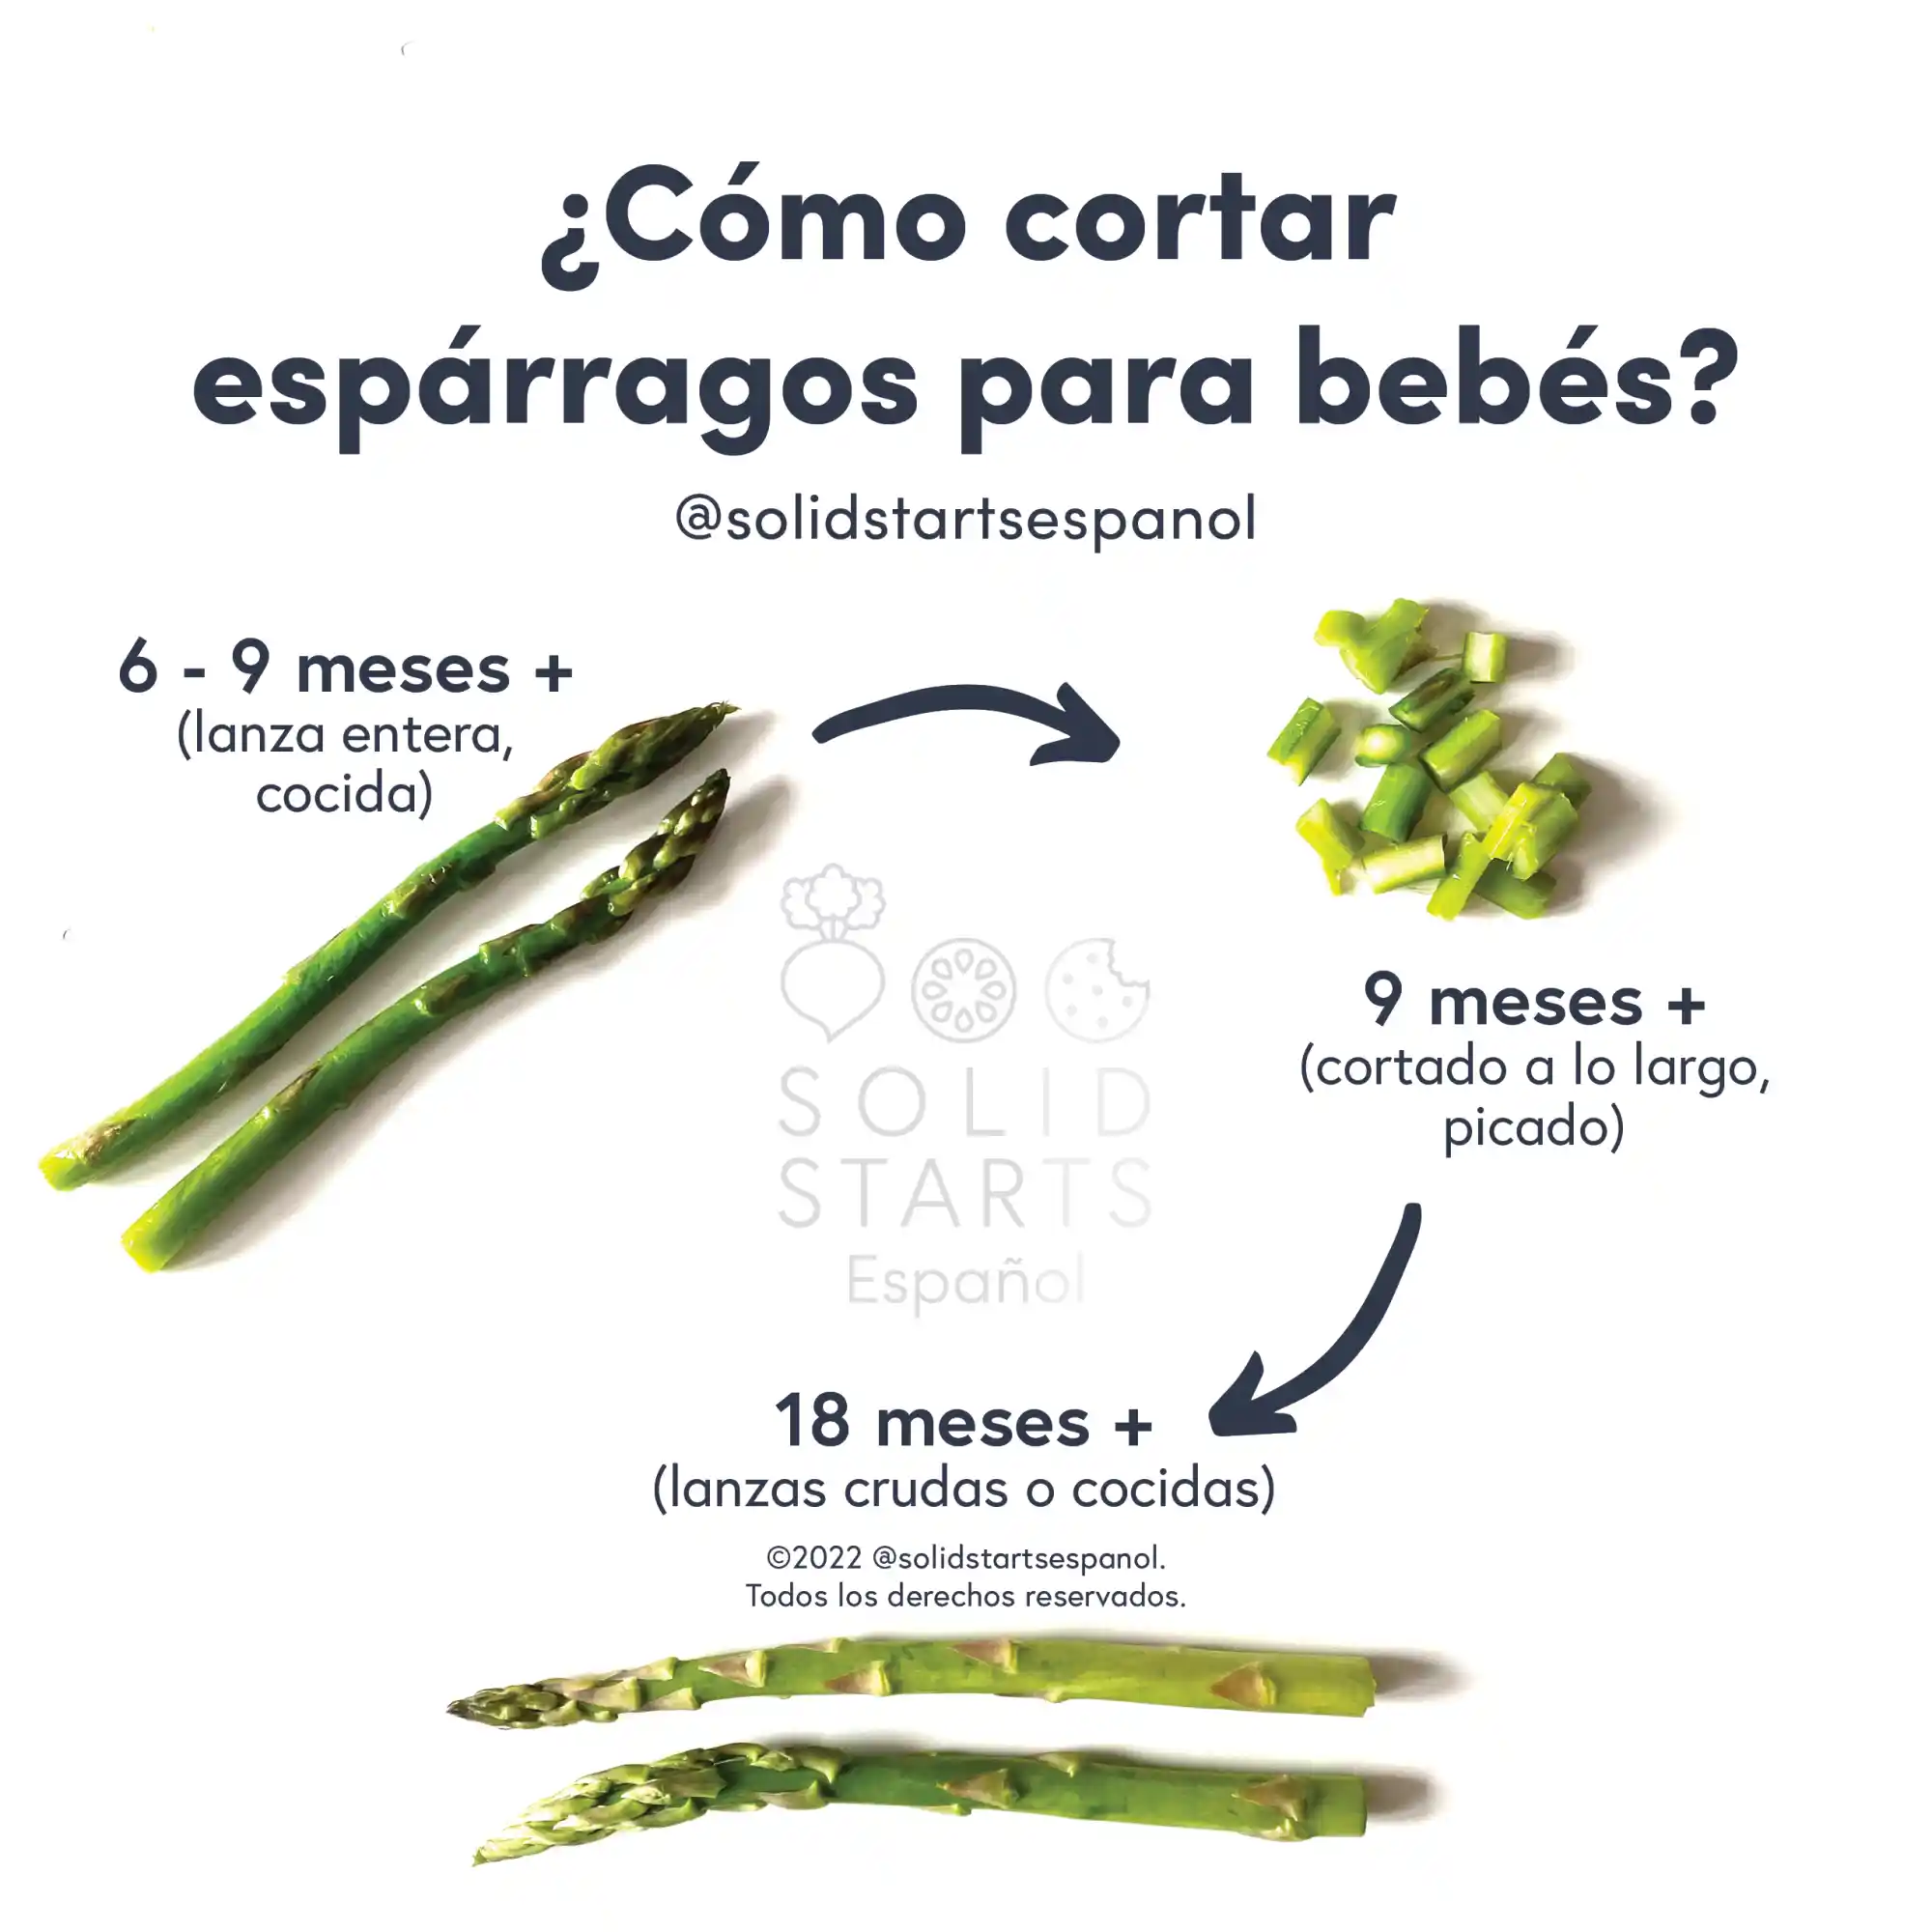 an infographic with the header "how to cut asparagus for babies: a whole cooked spear for babies 6 months+, cut lengthwise and roughly chopped for babies 9 months+, raw or cooked spears for 18 months+